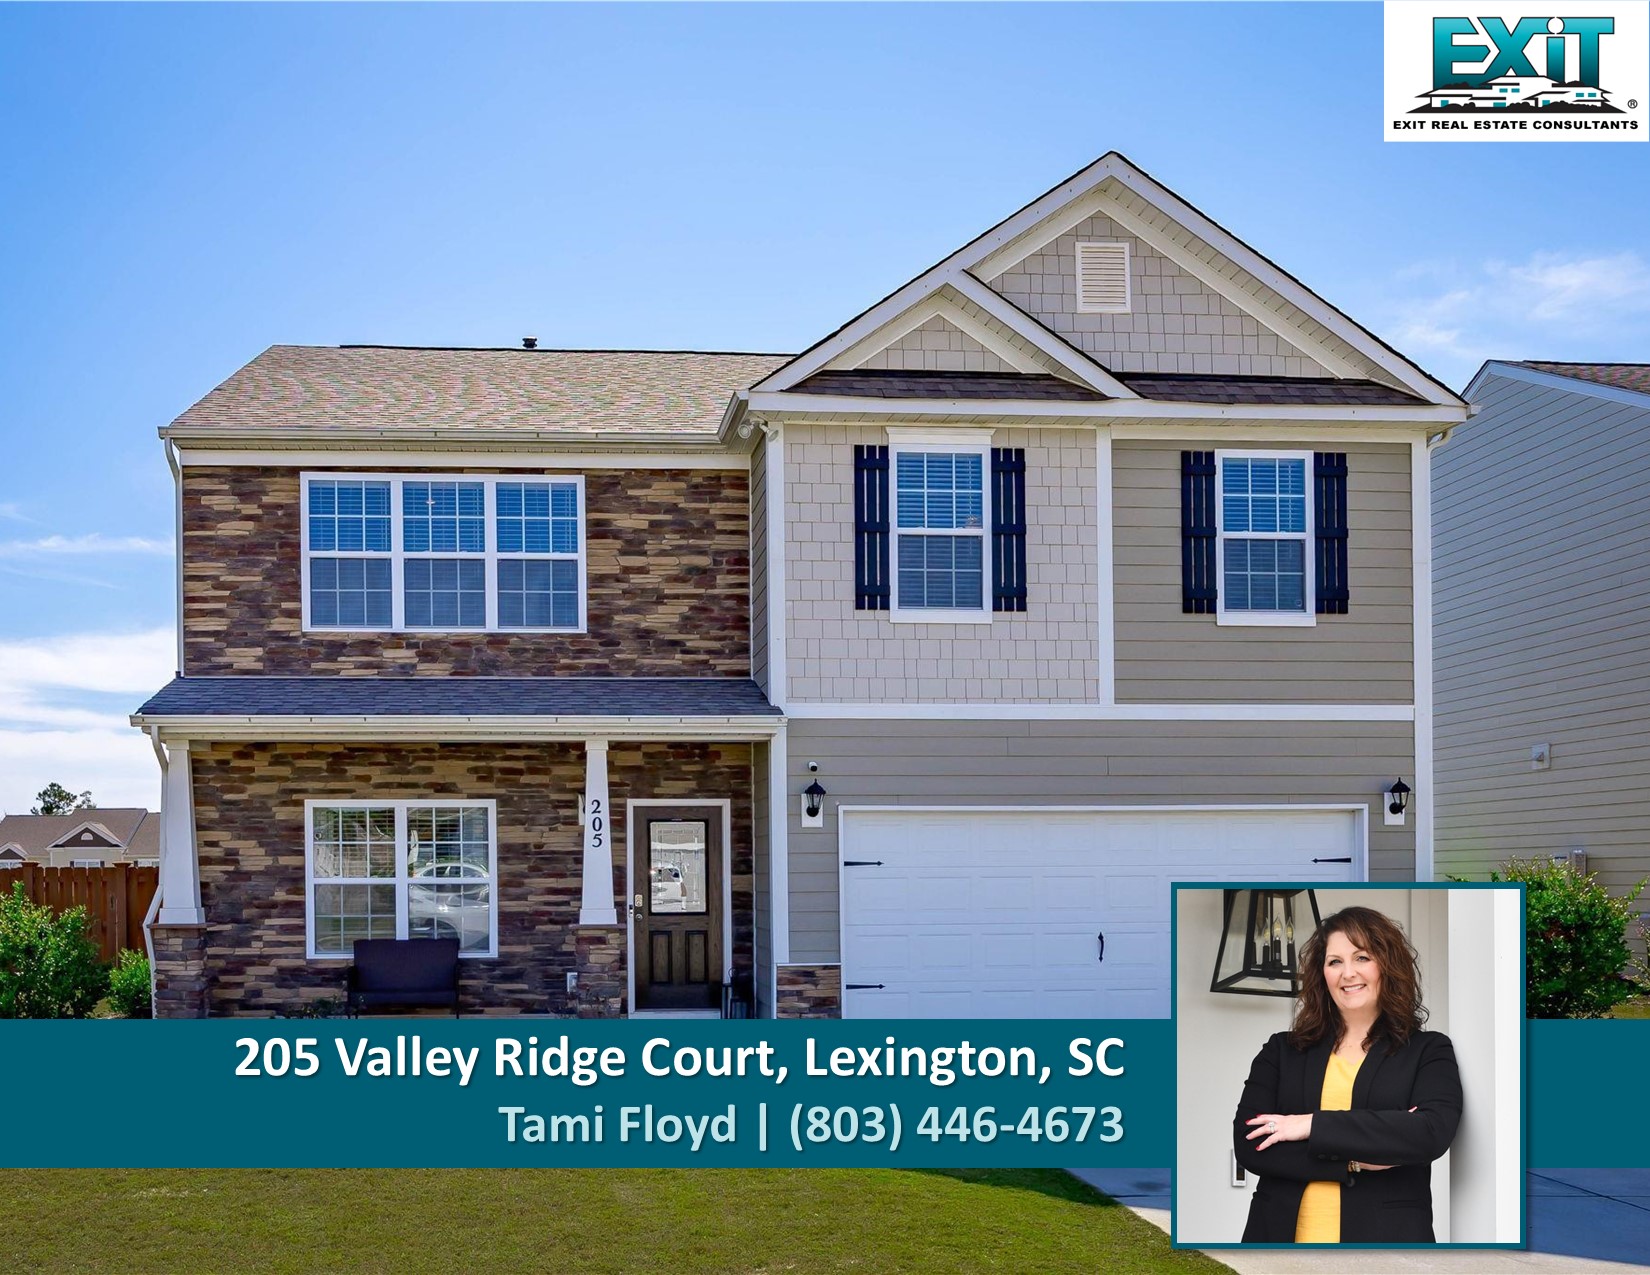 Just listed in Village Green Estates